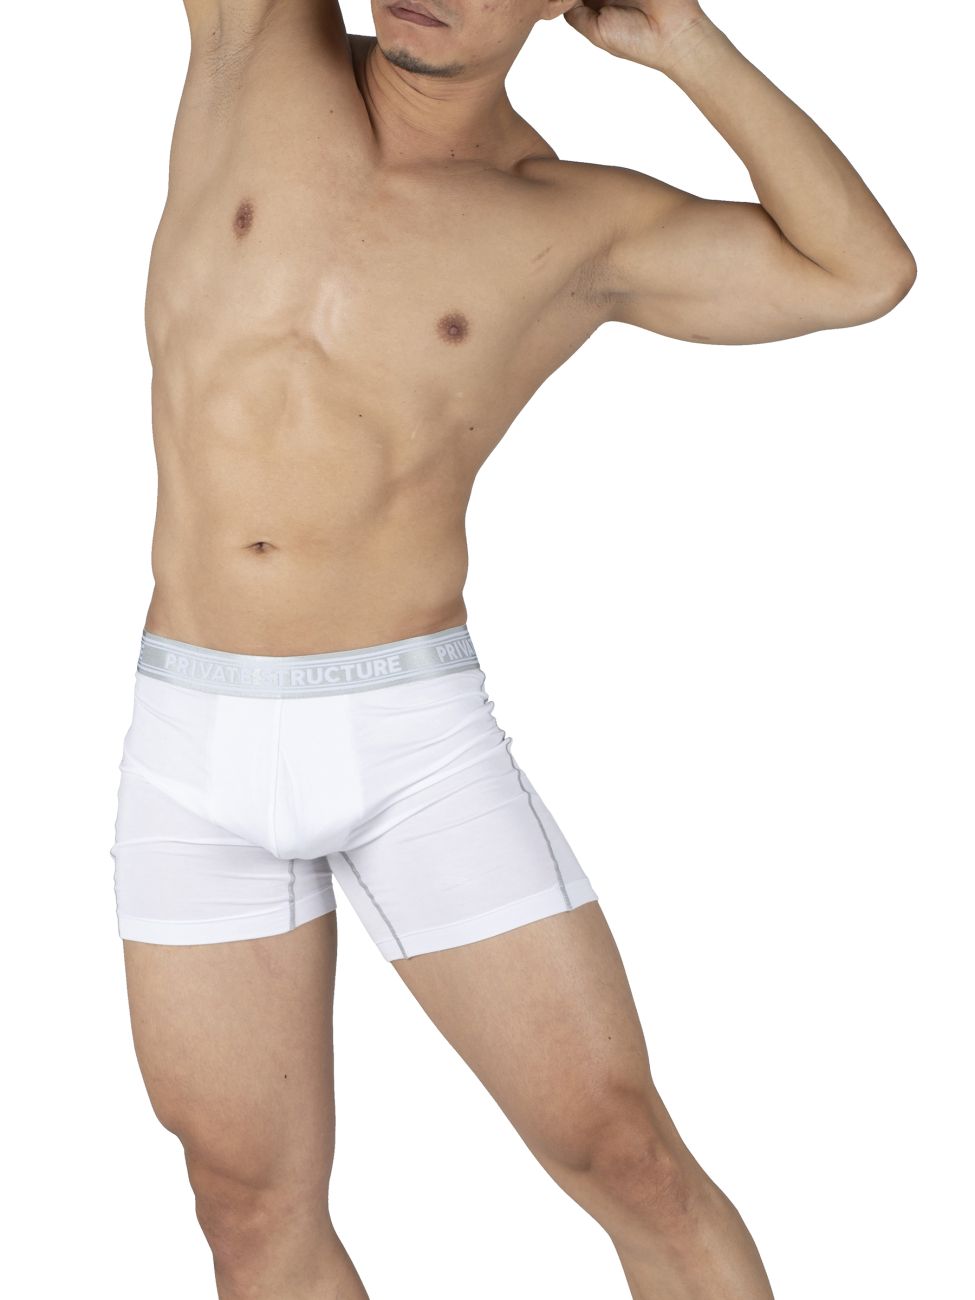 Private Structure Bamboo Mid Waist Boxer Briefs